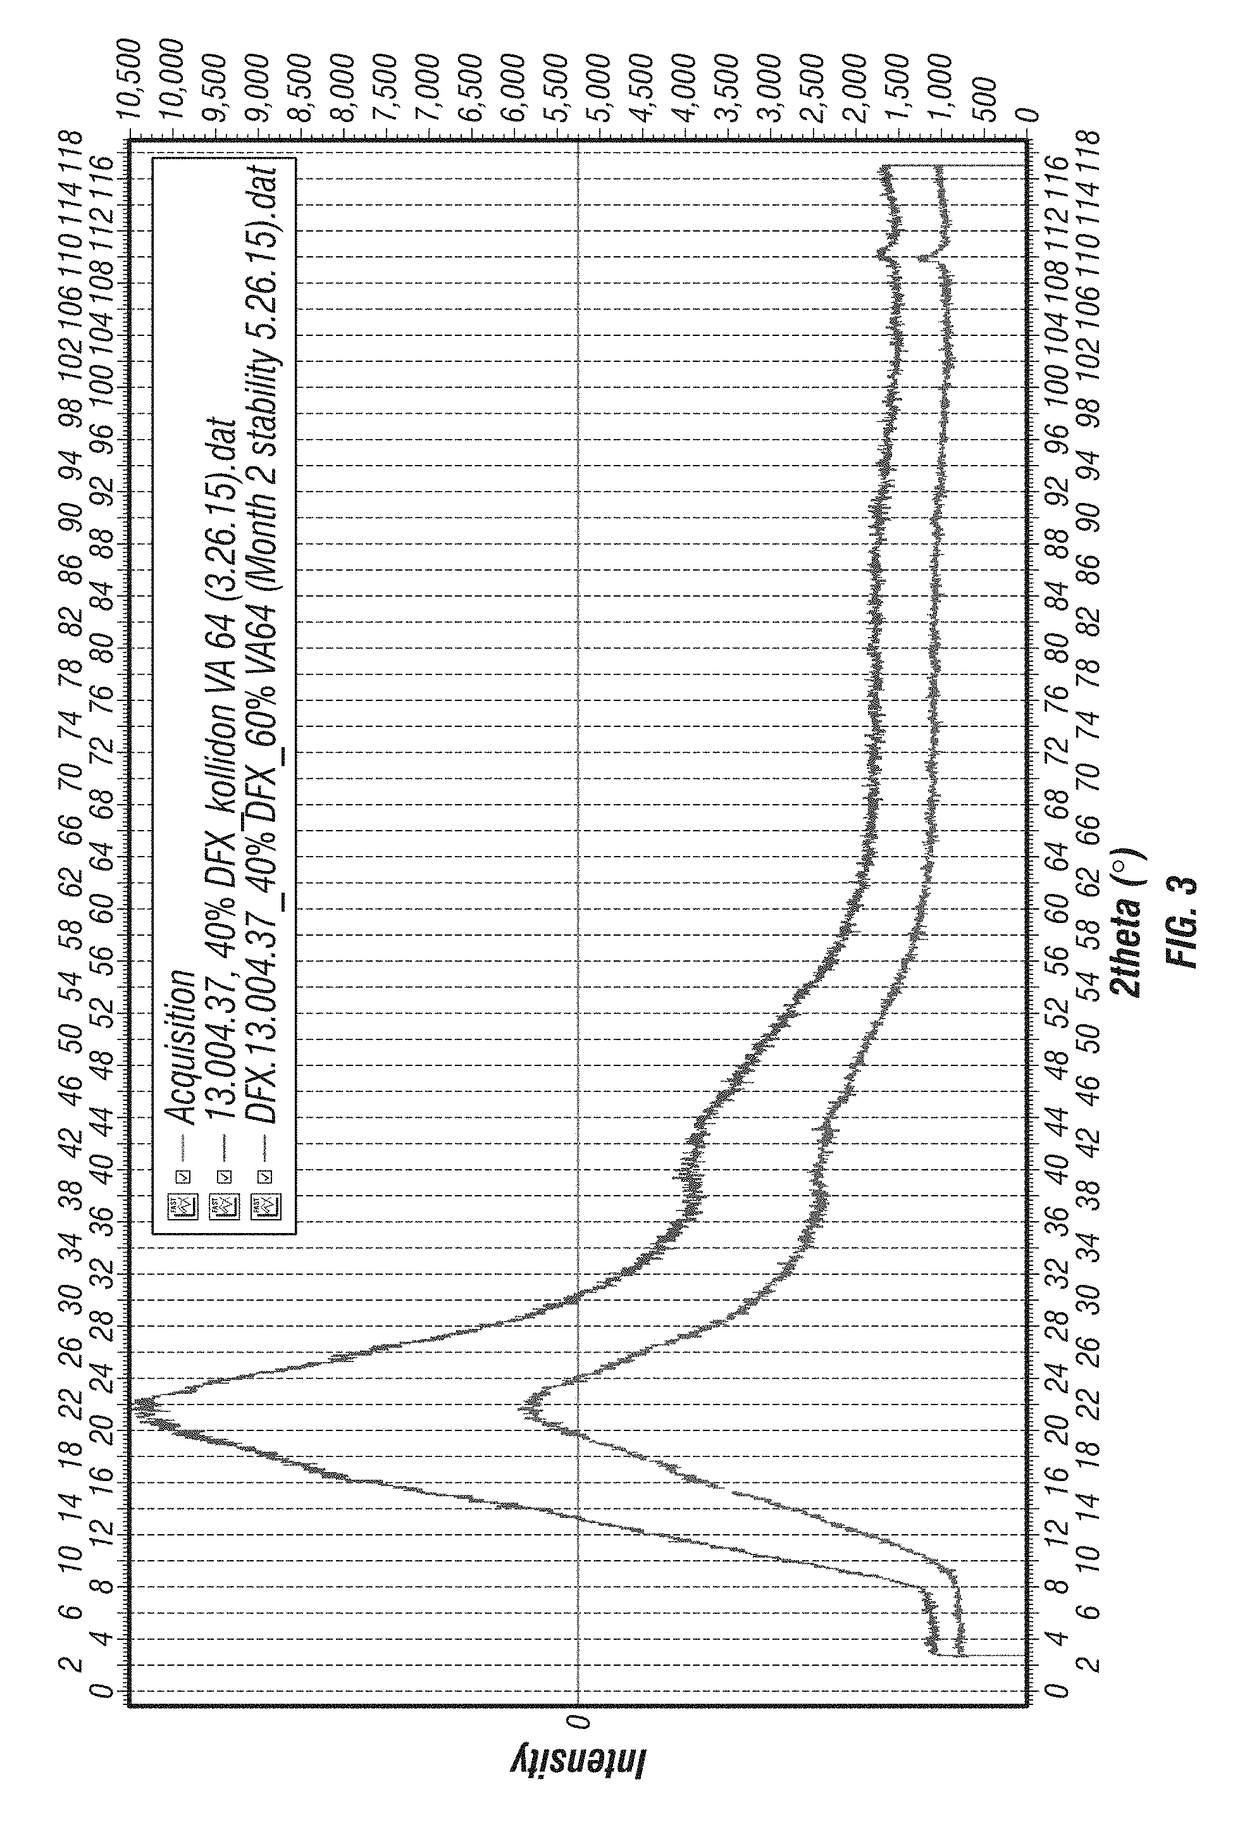 Formulations of deferasirox and methods of making the same